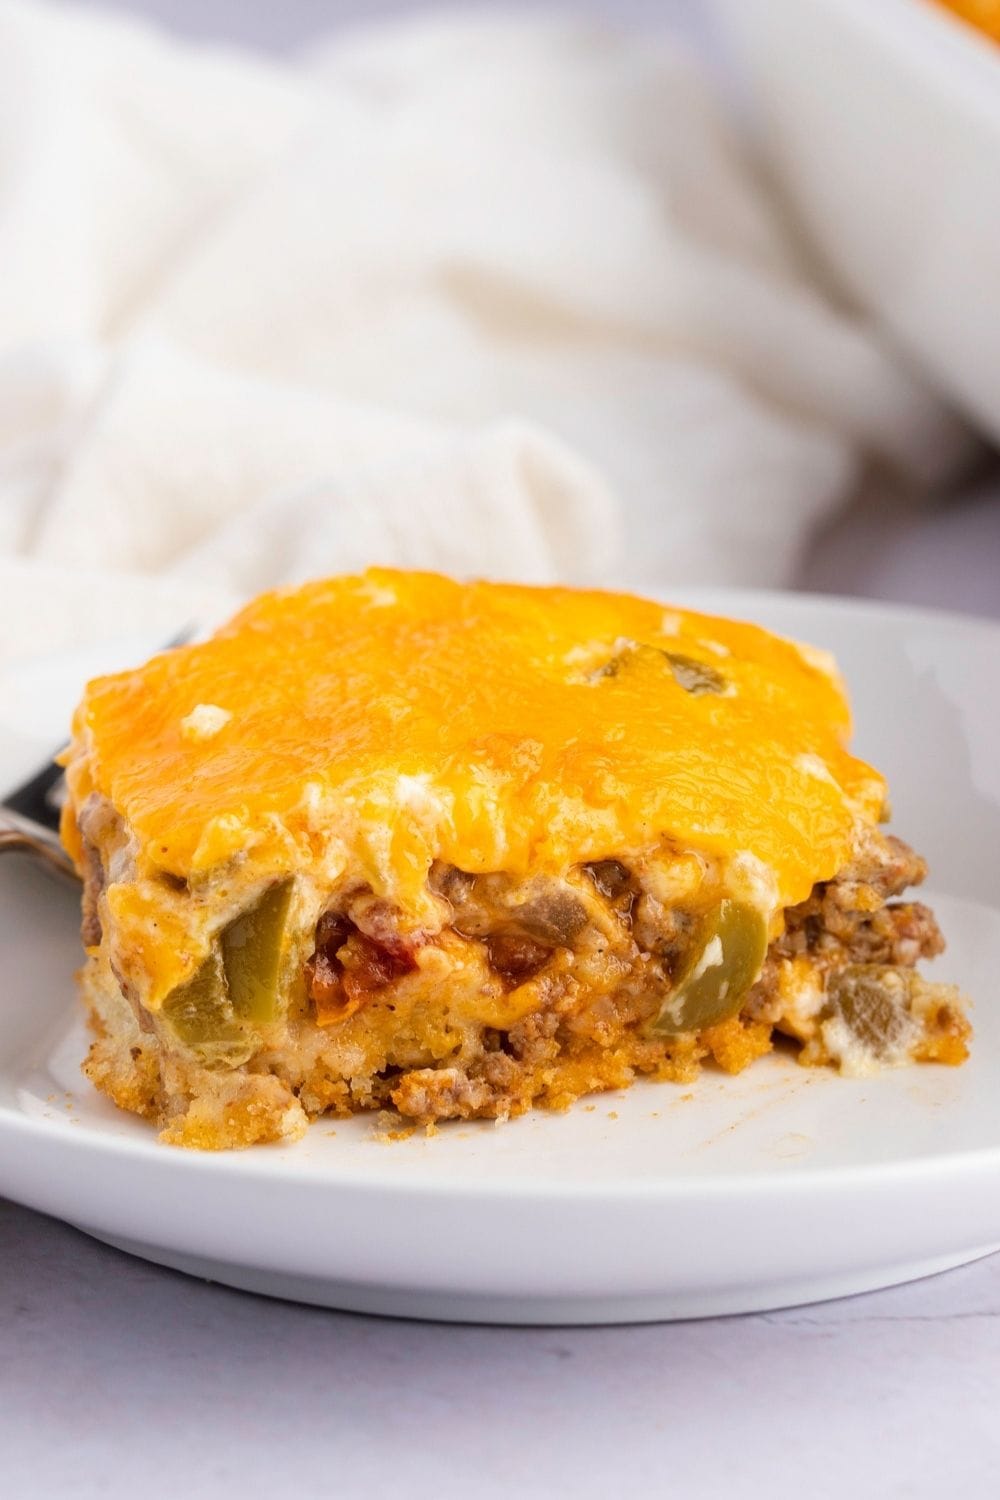 Cheesy and Spicy John Wayne Casserole with Ground Beef and Spices